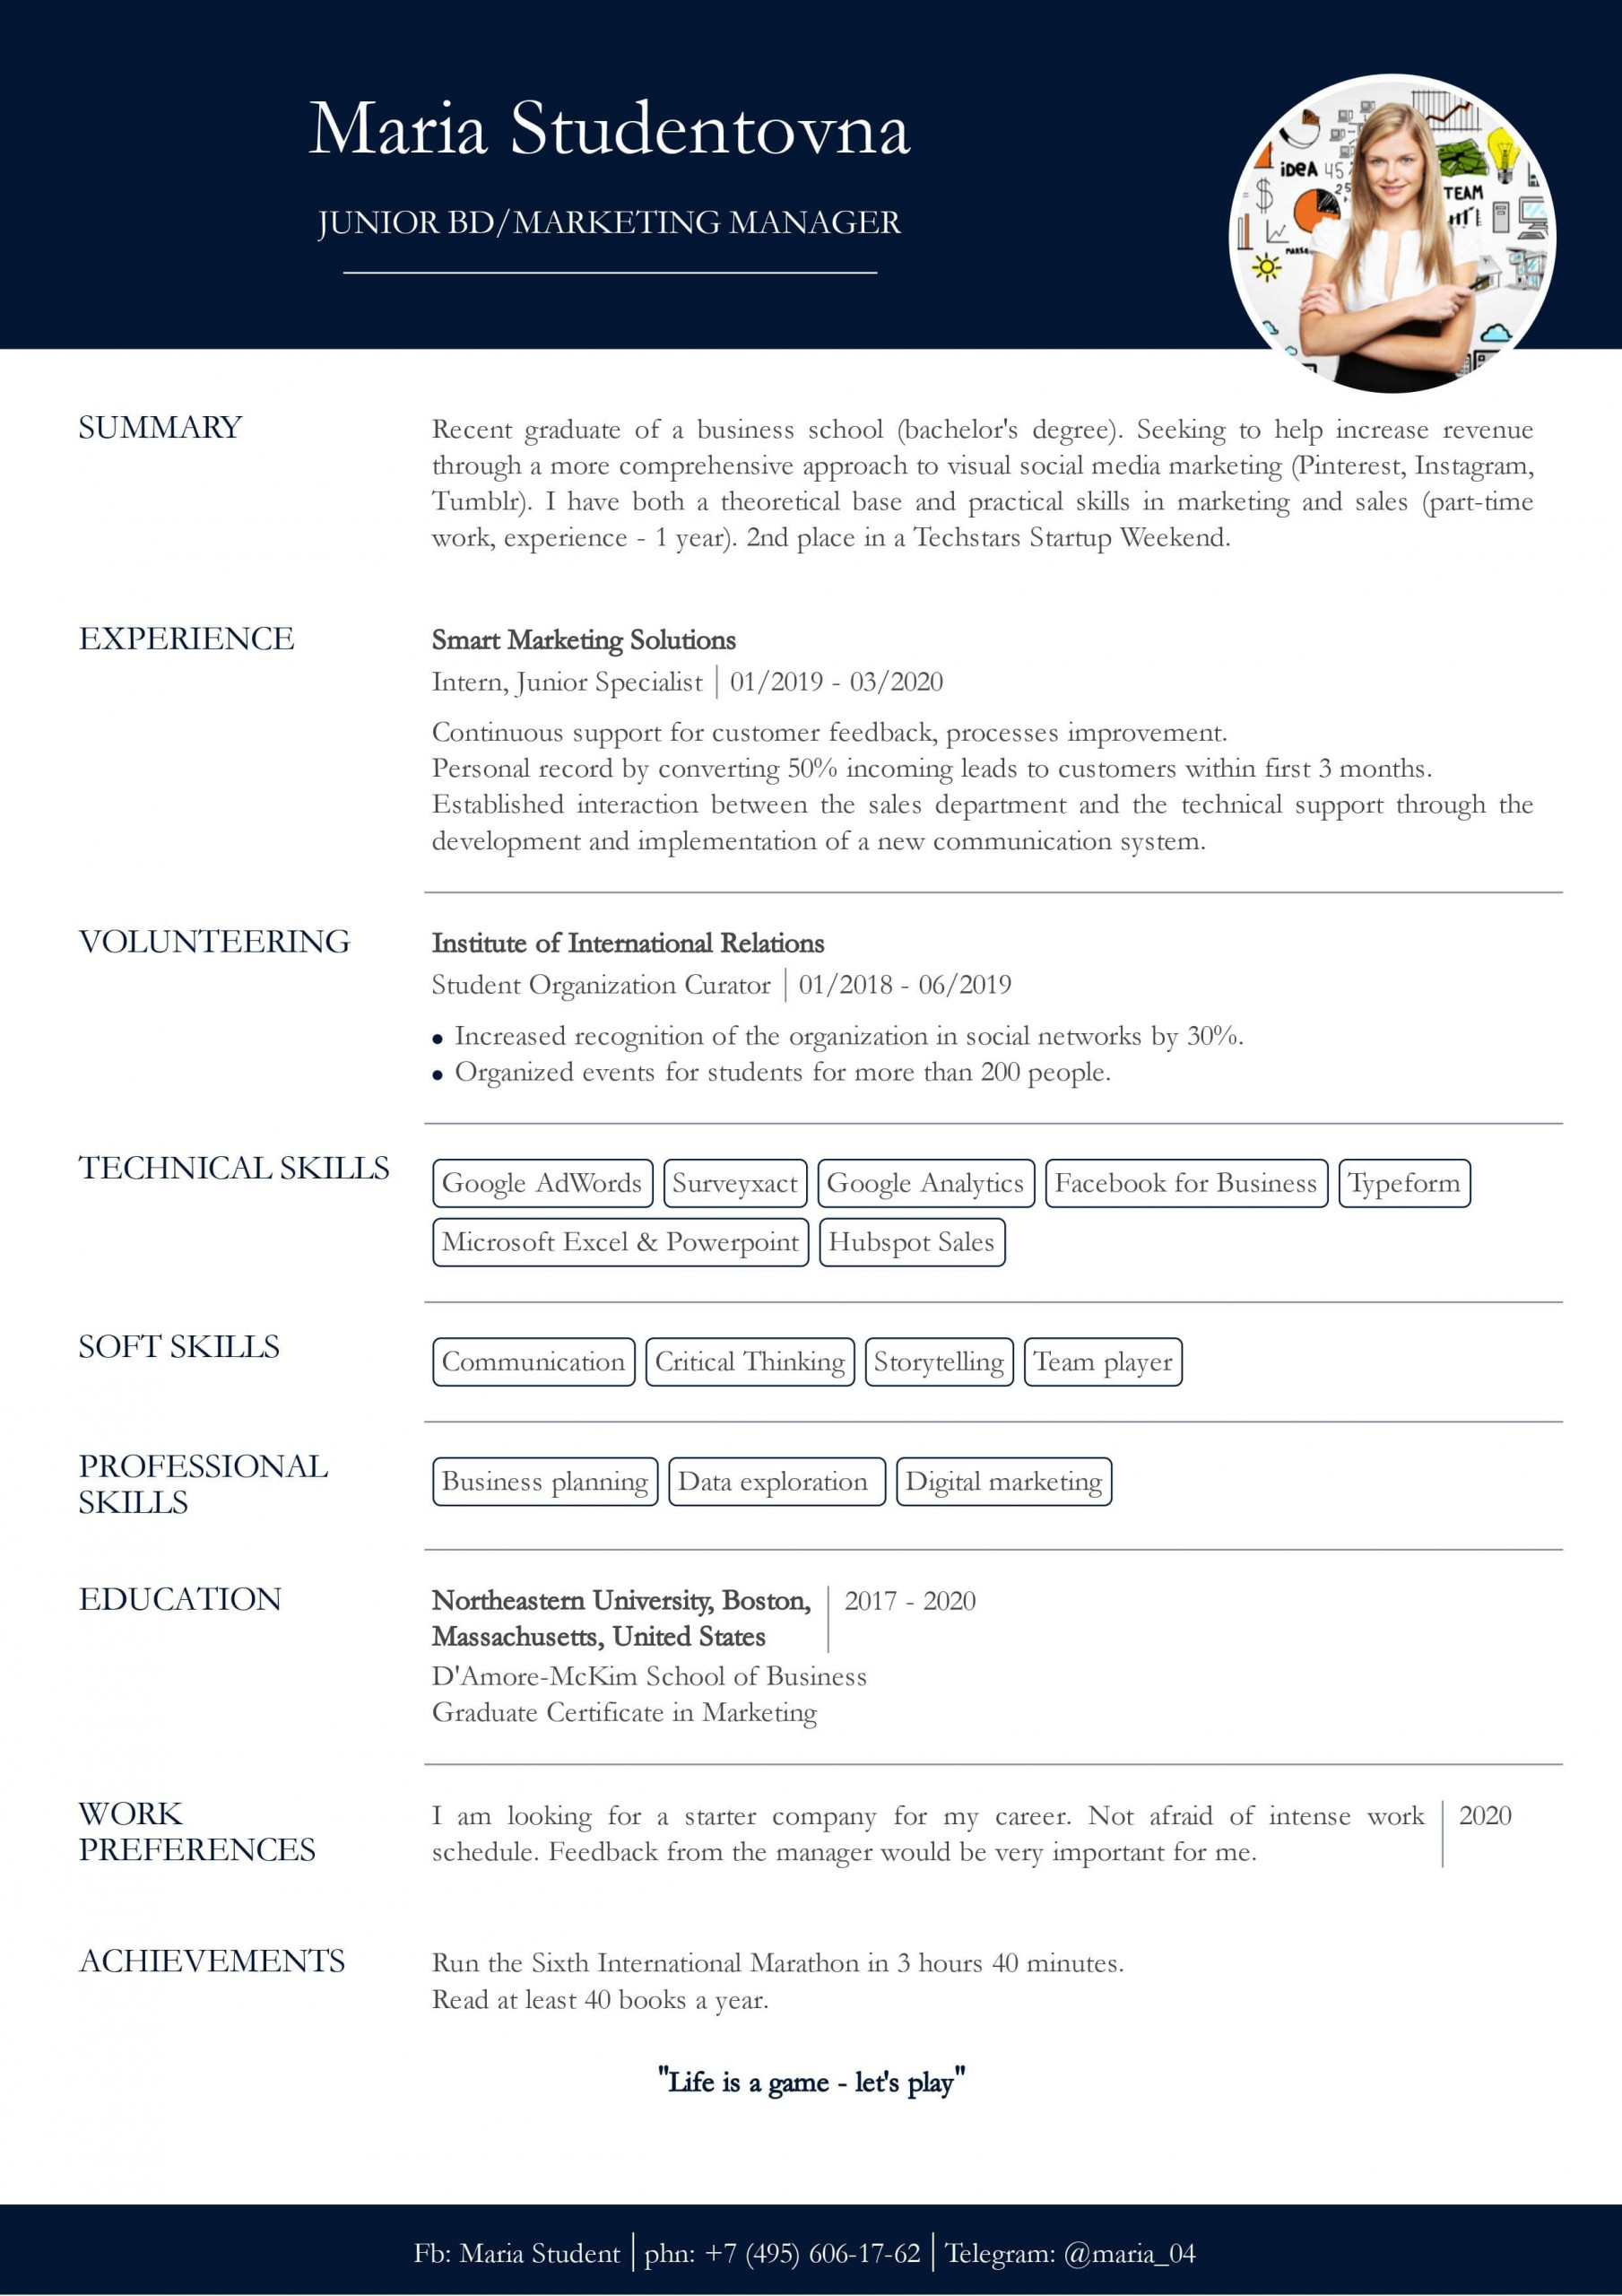 Resume for someone with No Experience Sample Resume with No Work Experience. Sample for Students. – Cv2you Blog